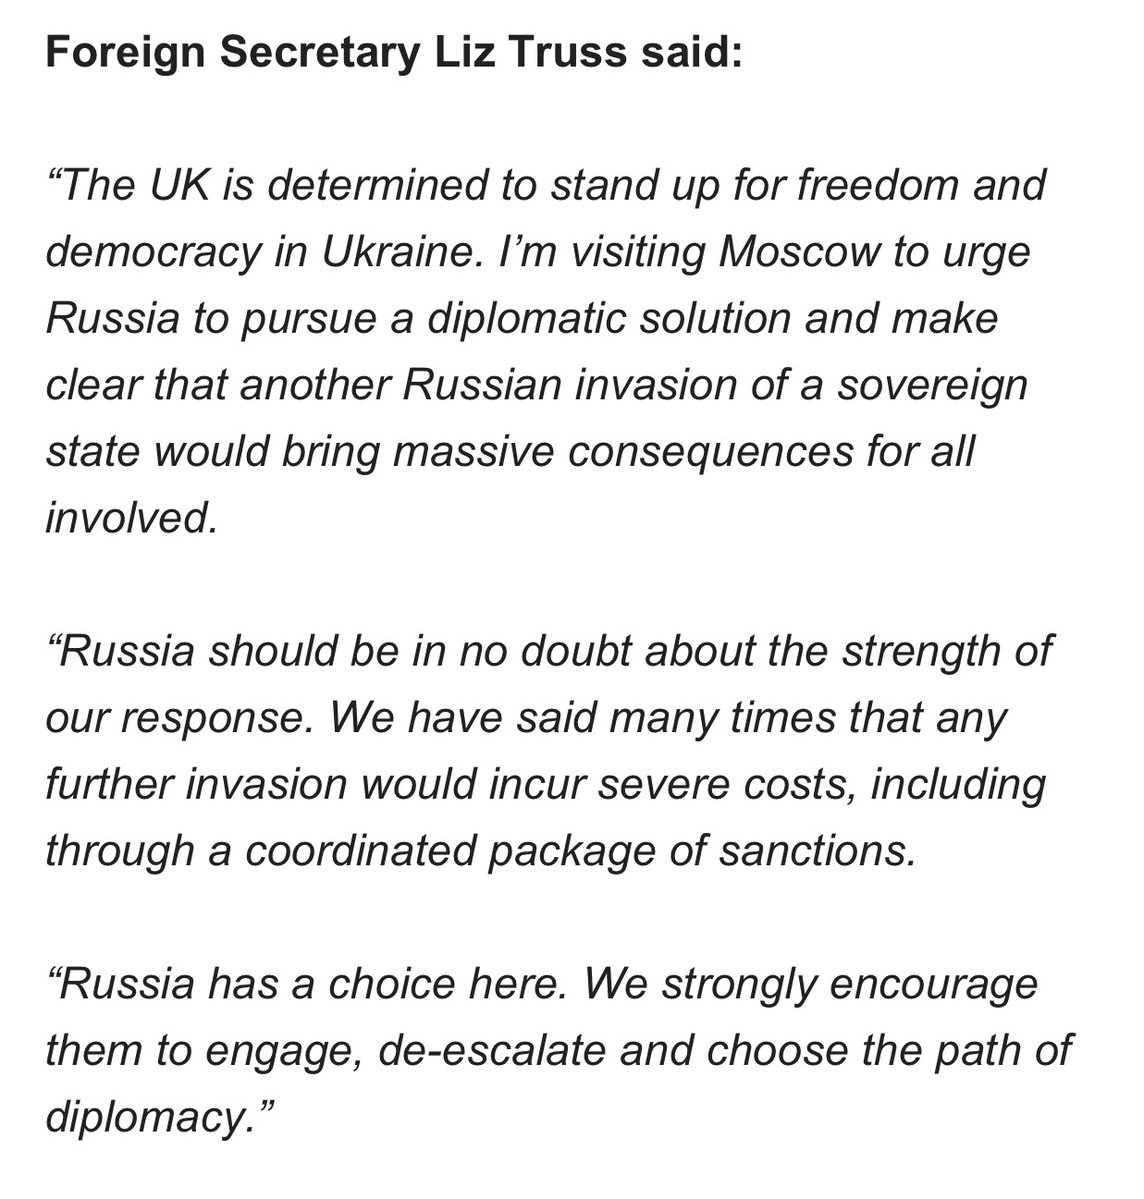 .@trussliz is flying to Moscow today on 2-day trip to discuss Ukraine crisis - 1st visit by a UK foreign secretary in more than 4 years. She'll urge Kremlin to pursue diplomatic solution & say further invasion would bring massive consequences for all involved